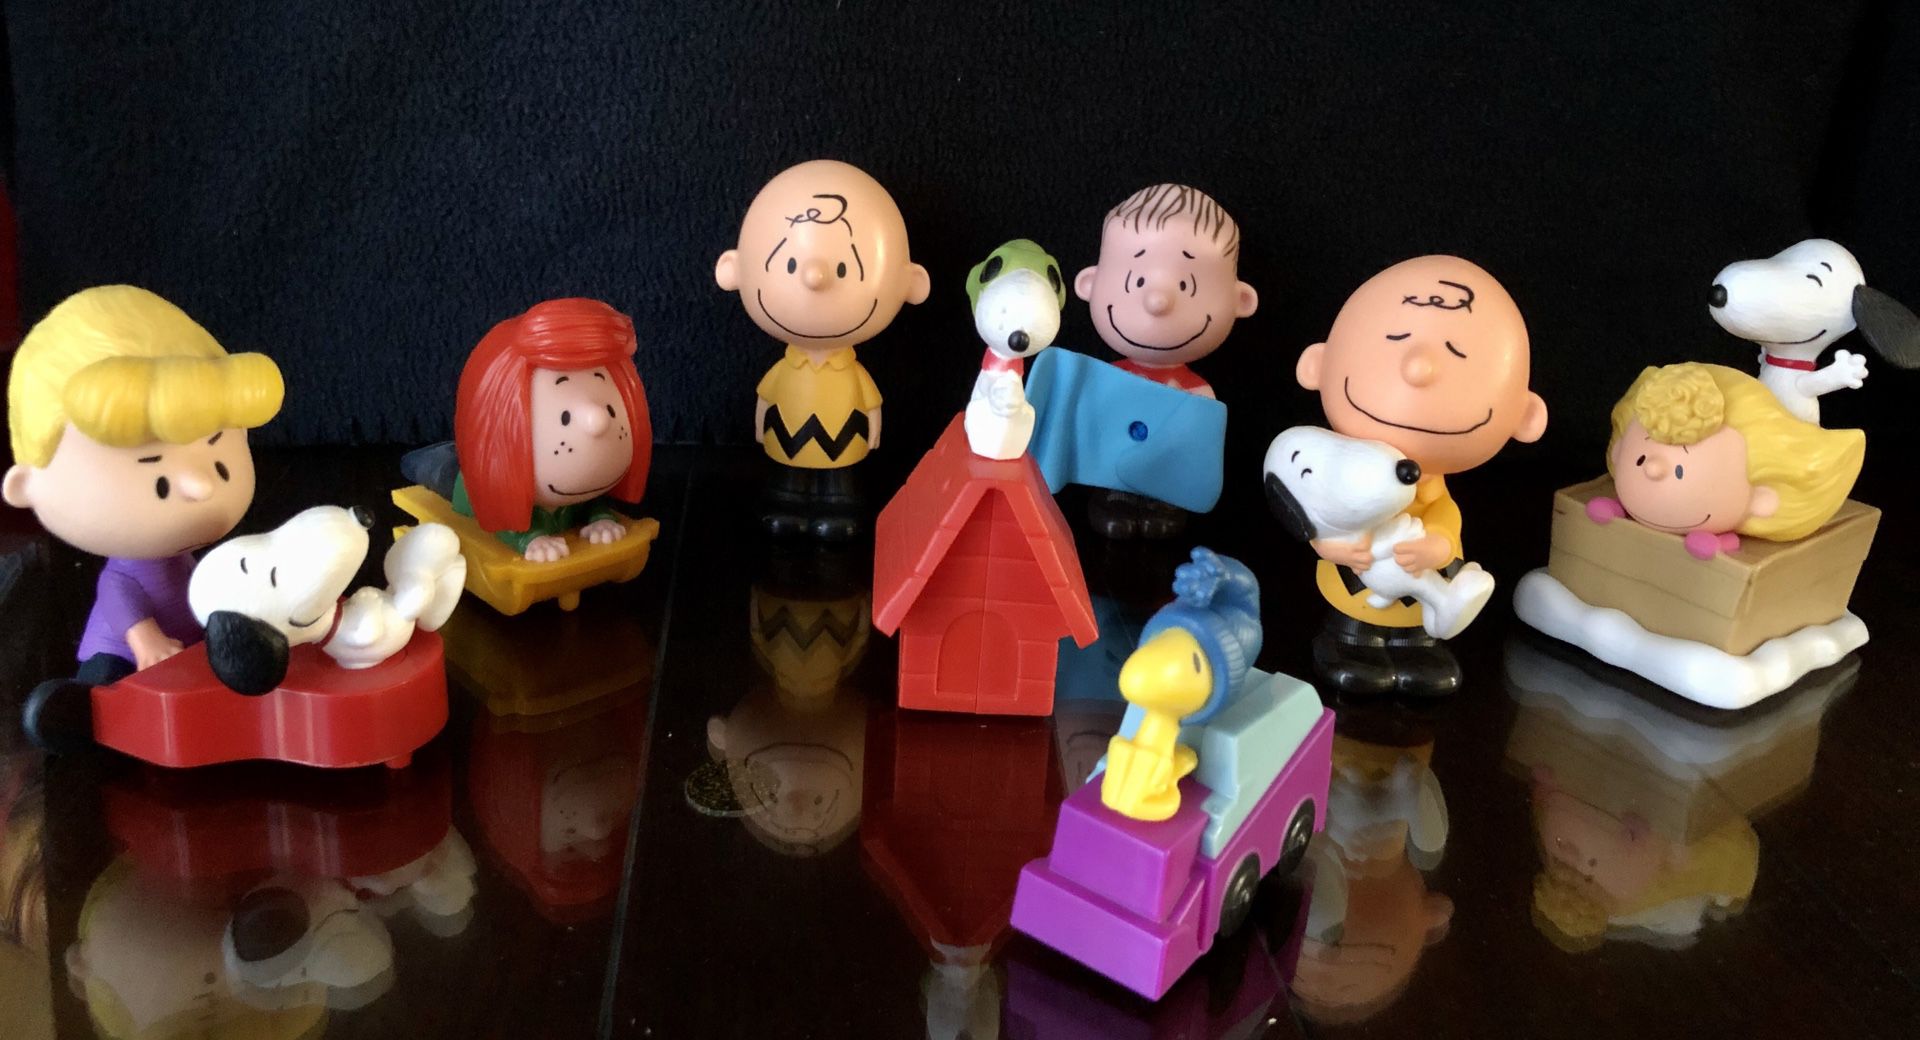 Charlie Brown McDonalds Happy Meal Toys 2015 & 2018 Peanuts Gang Lot Of 8 Figure